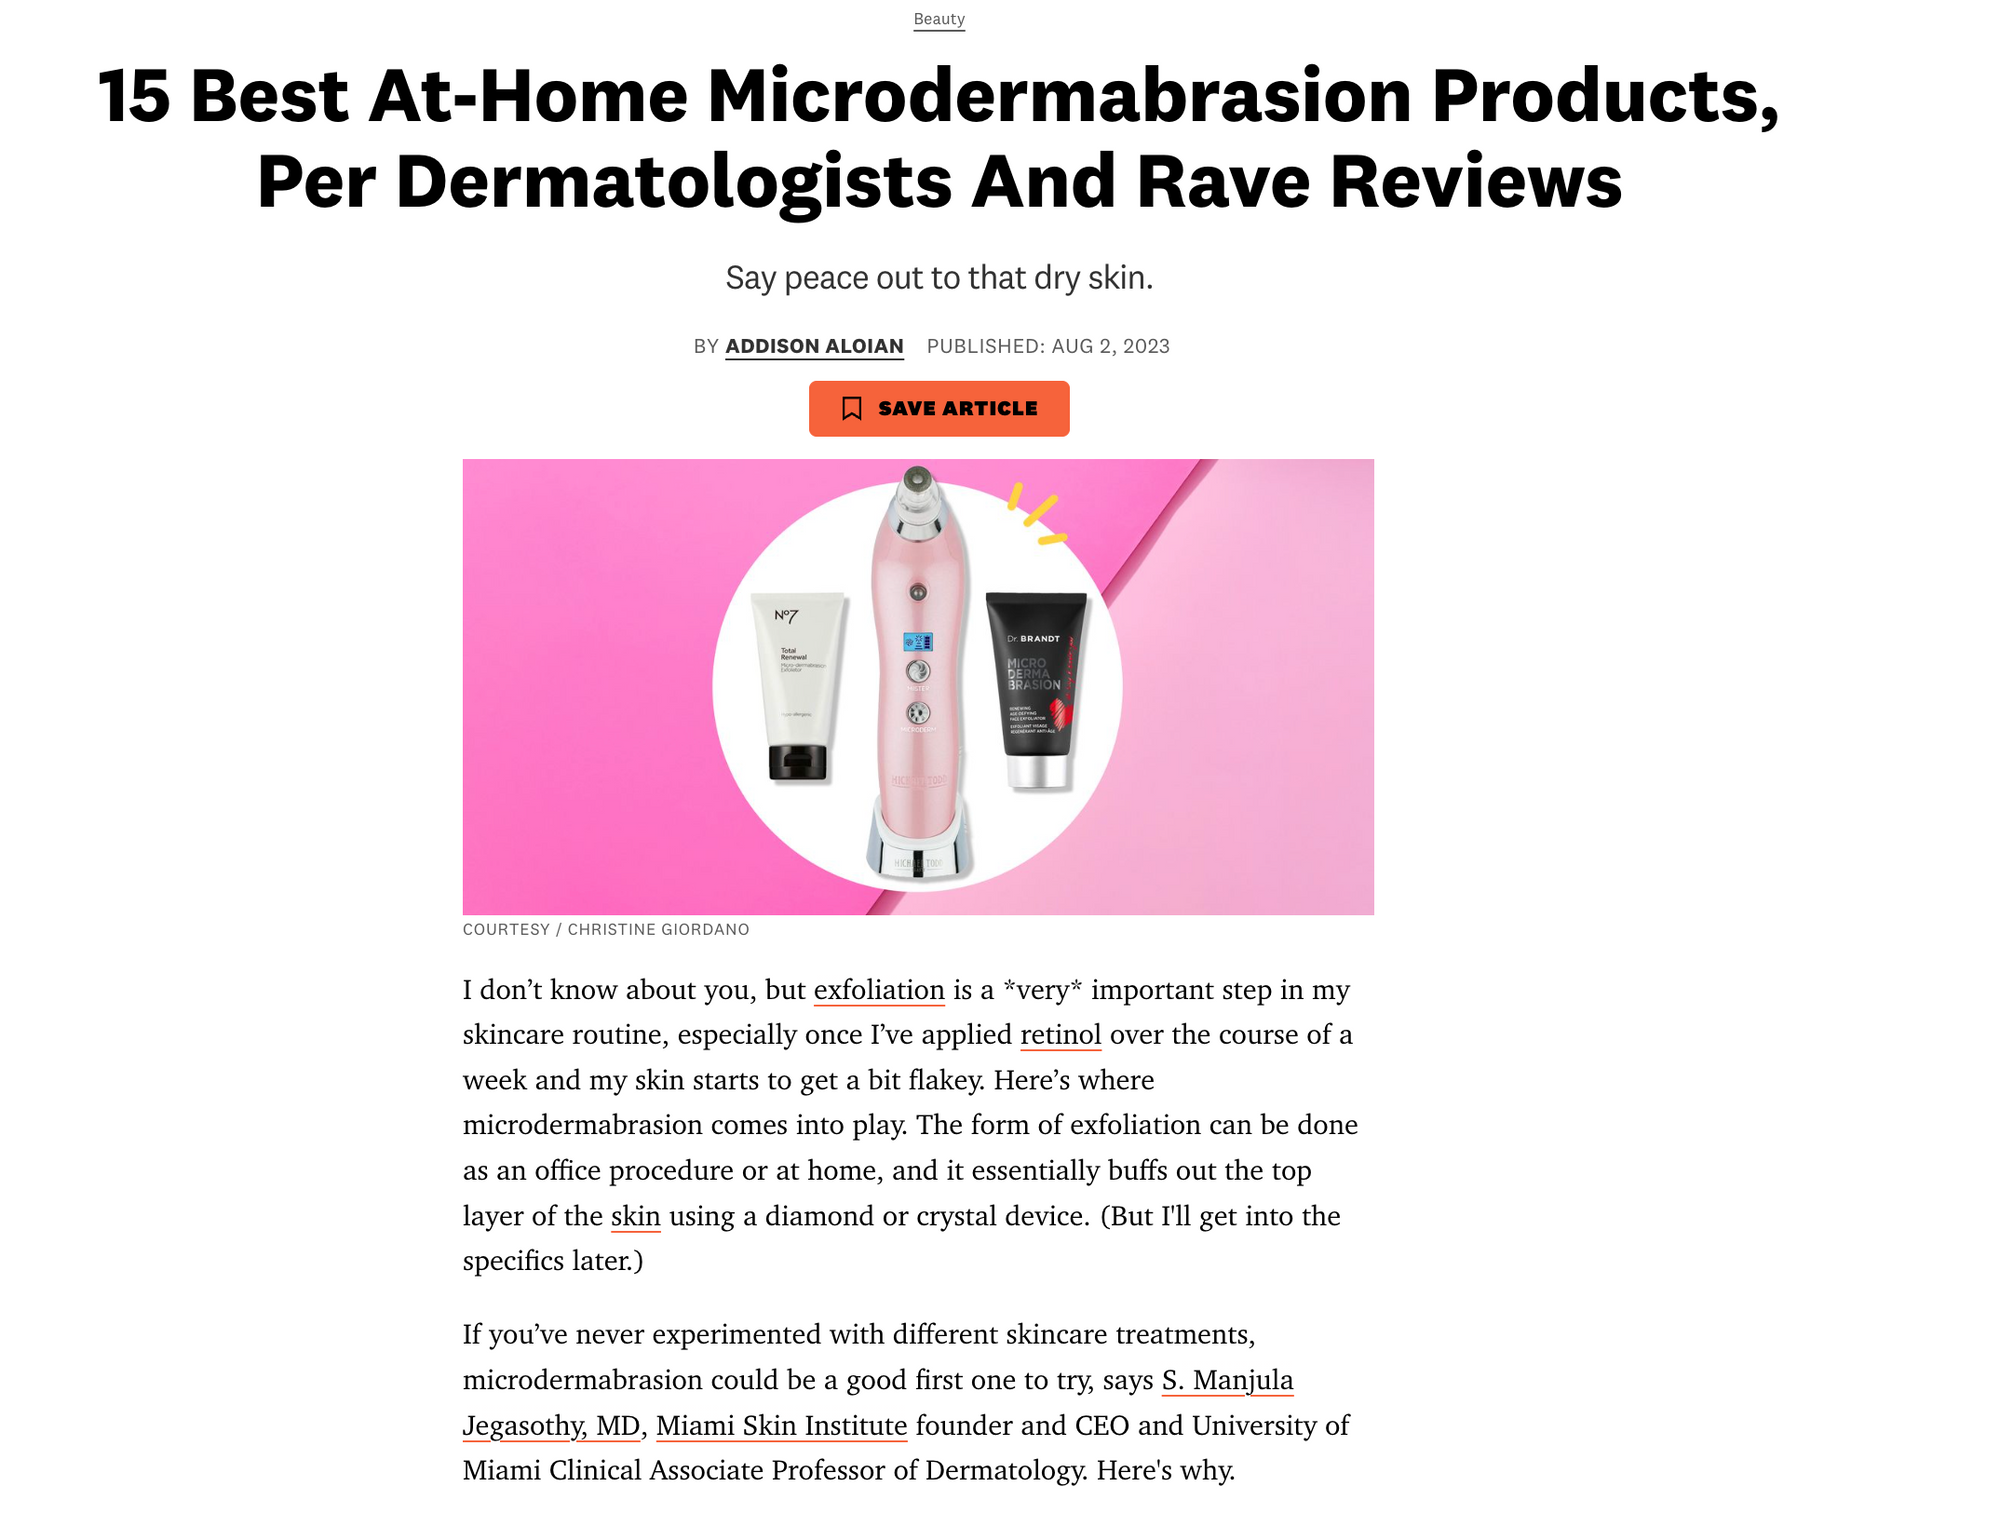 15 Best At-Home Microdermabrasion Products, Per Dermatologists And Rave Reviews in Women's Heath Magazine